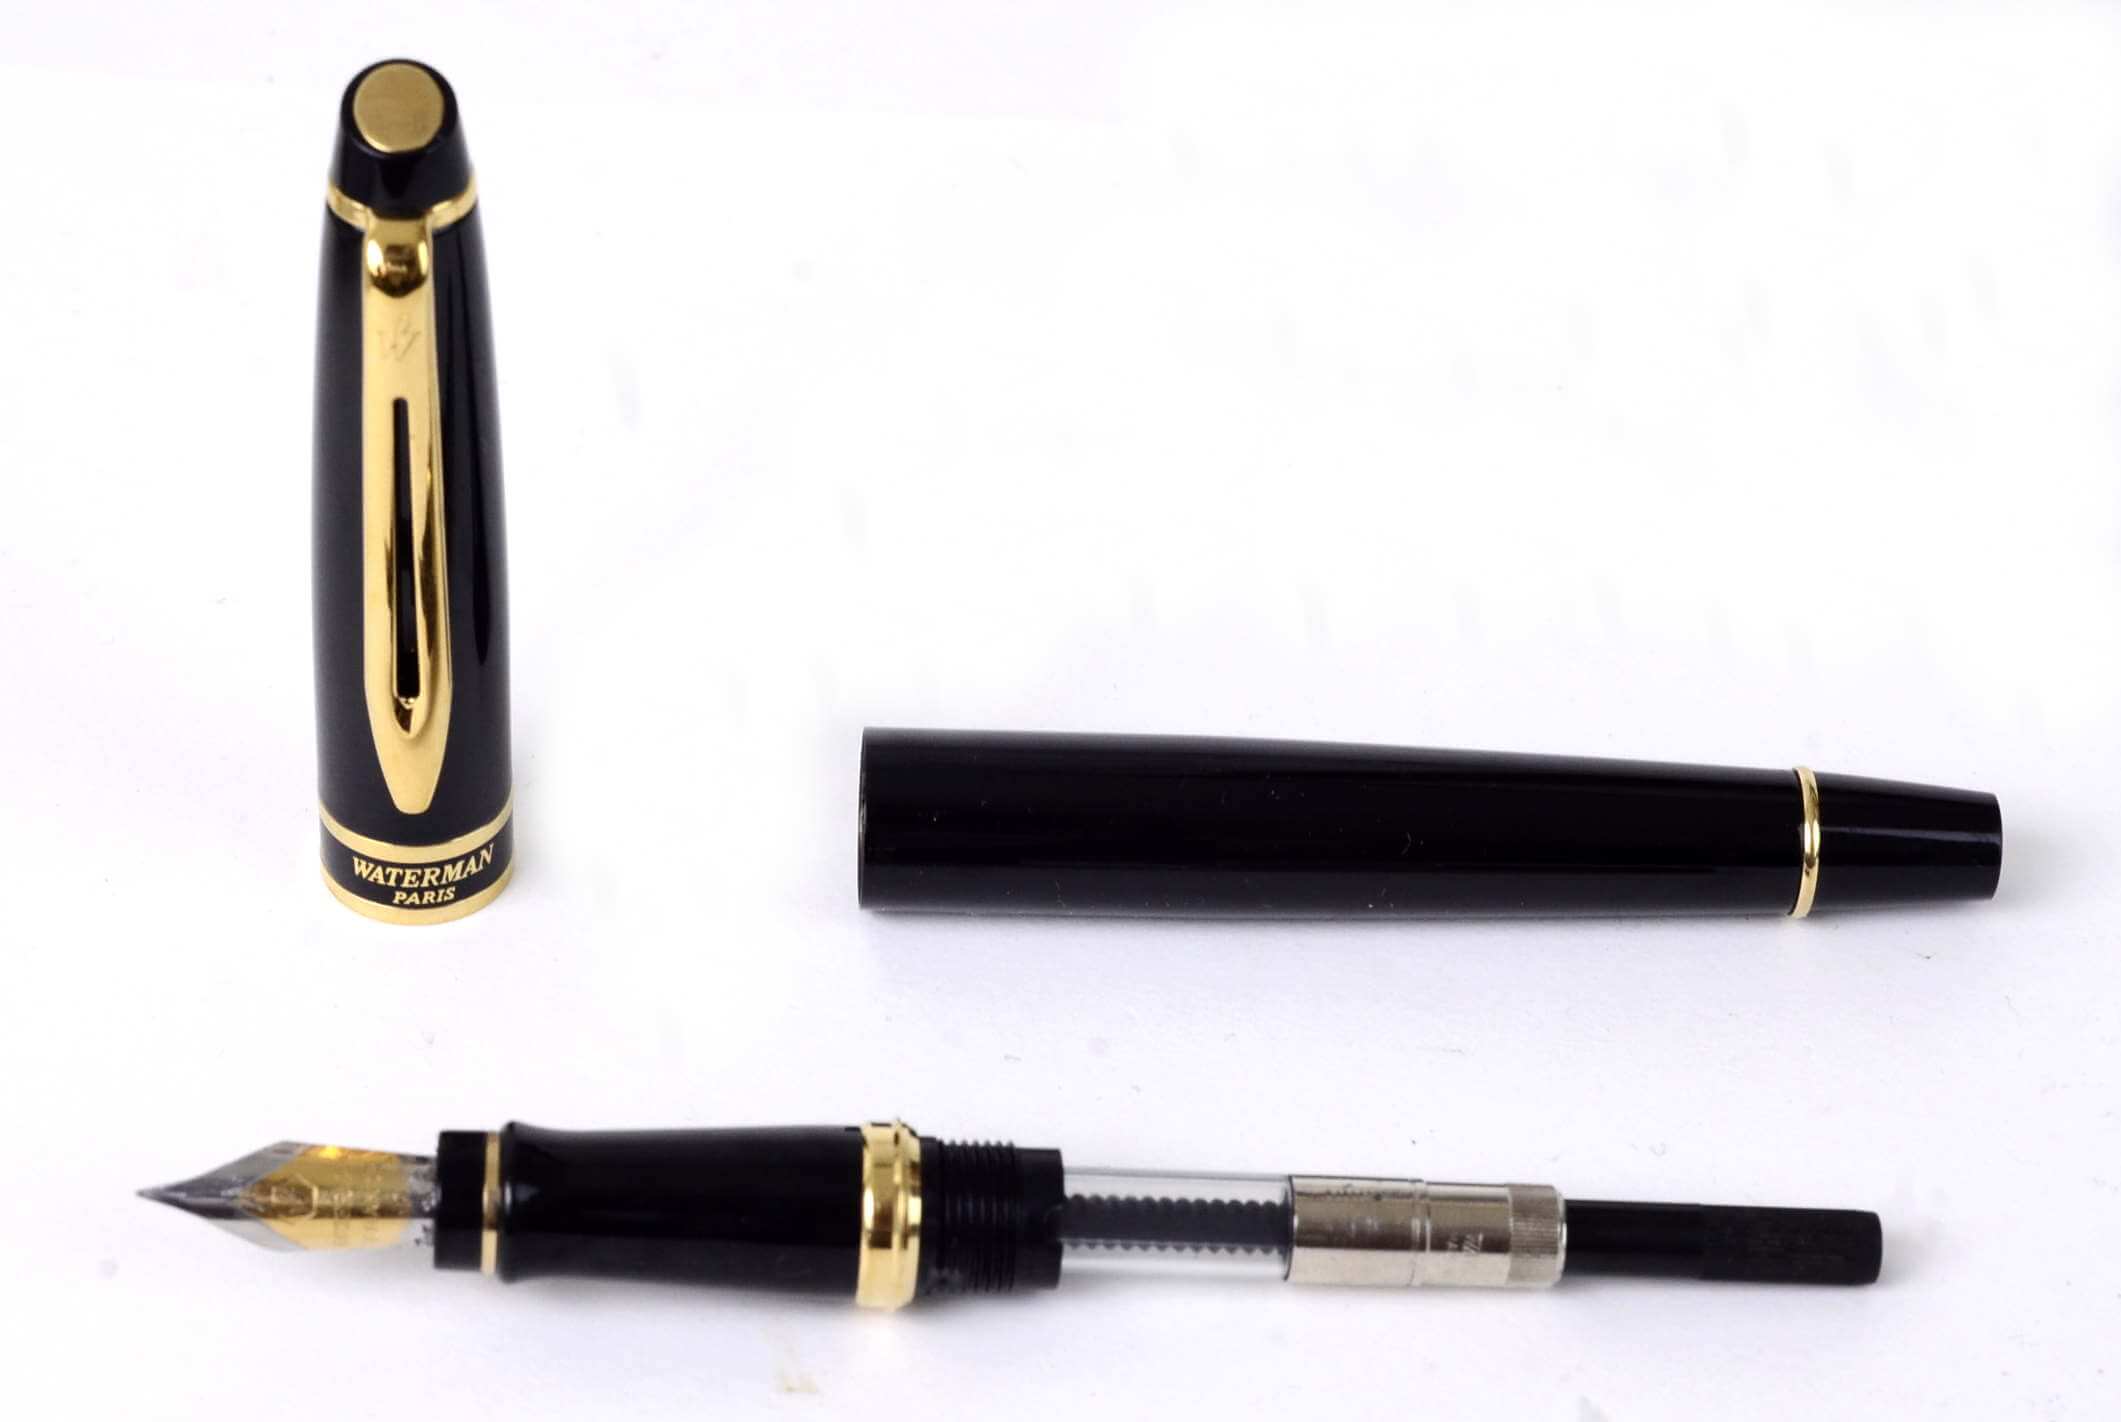 Buy Waterman Expert II fountain pen in pre-owned working condition